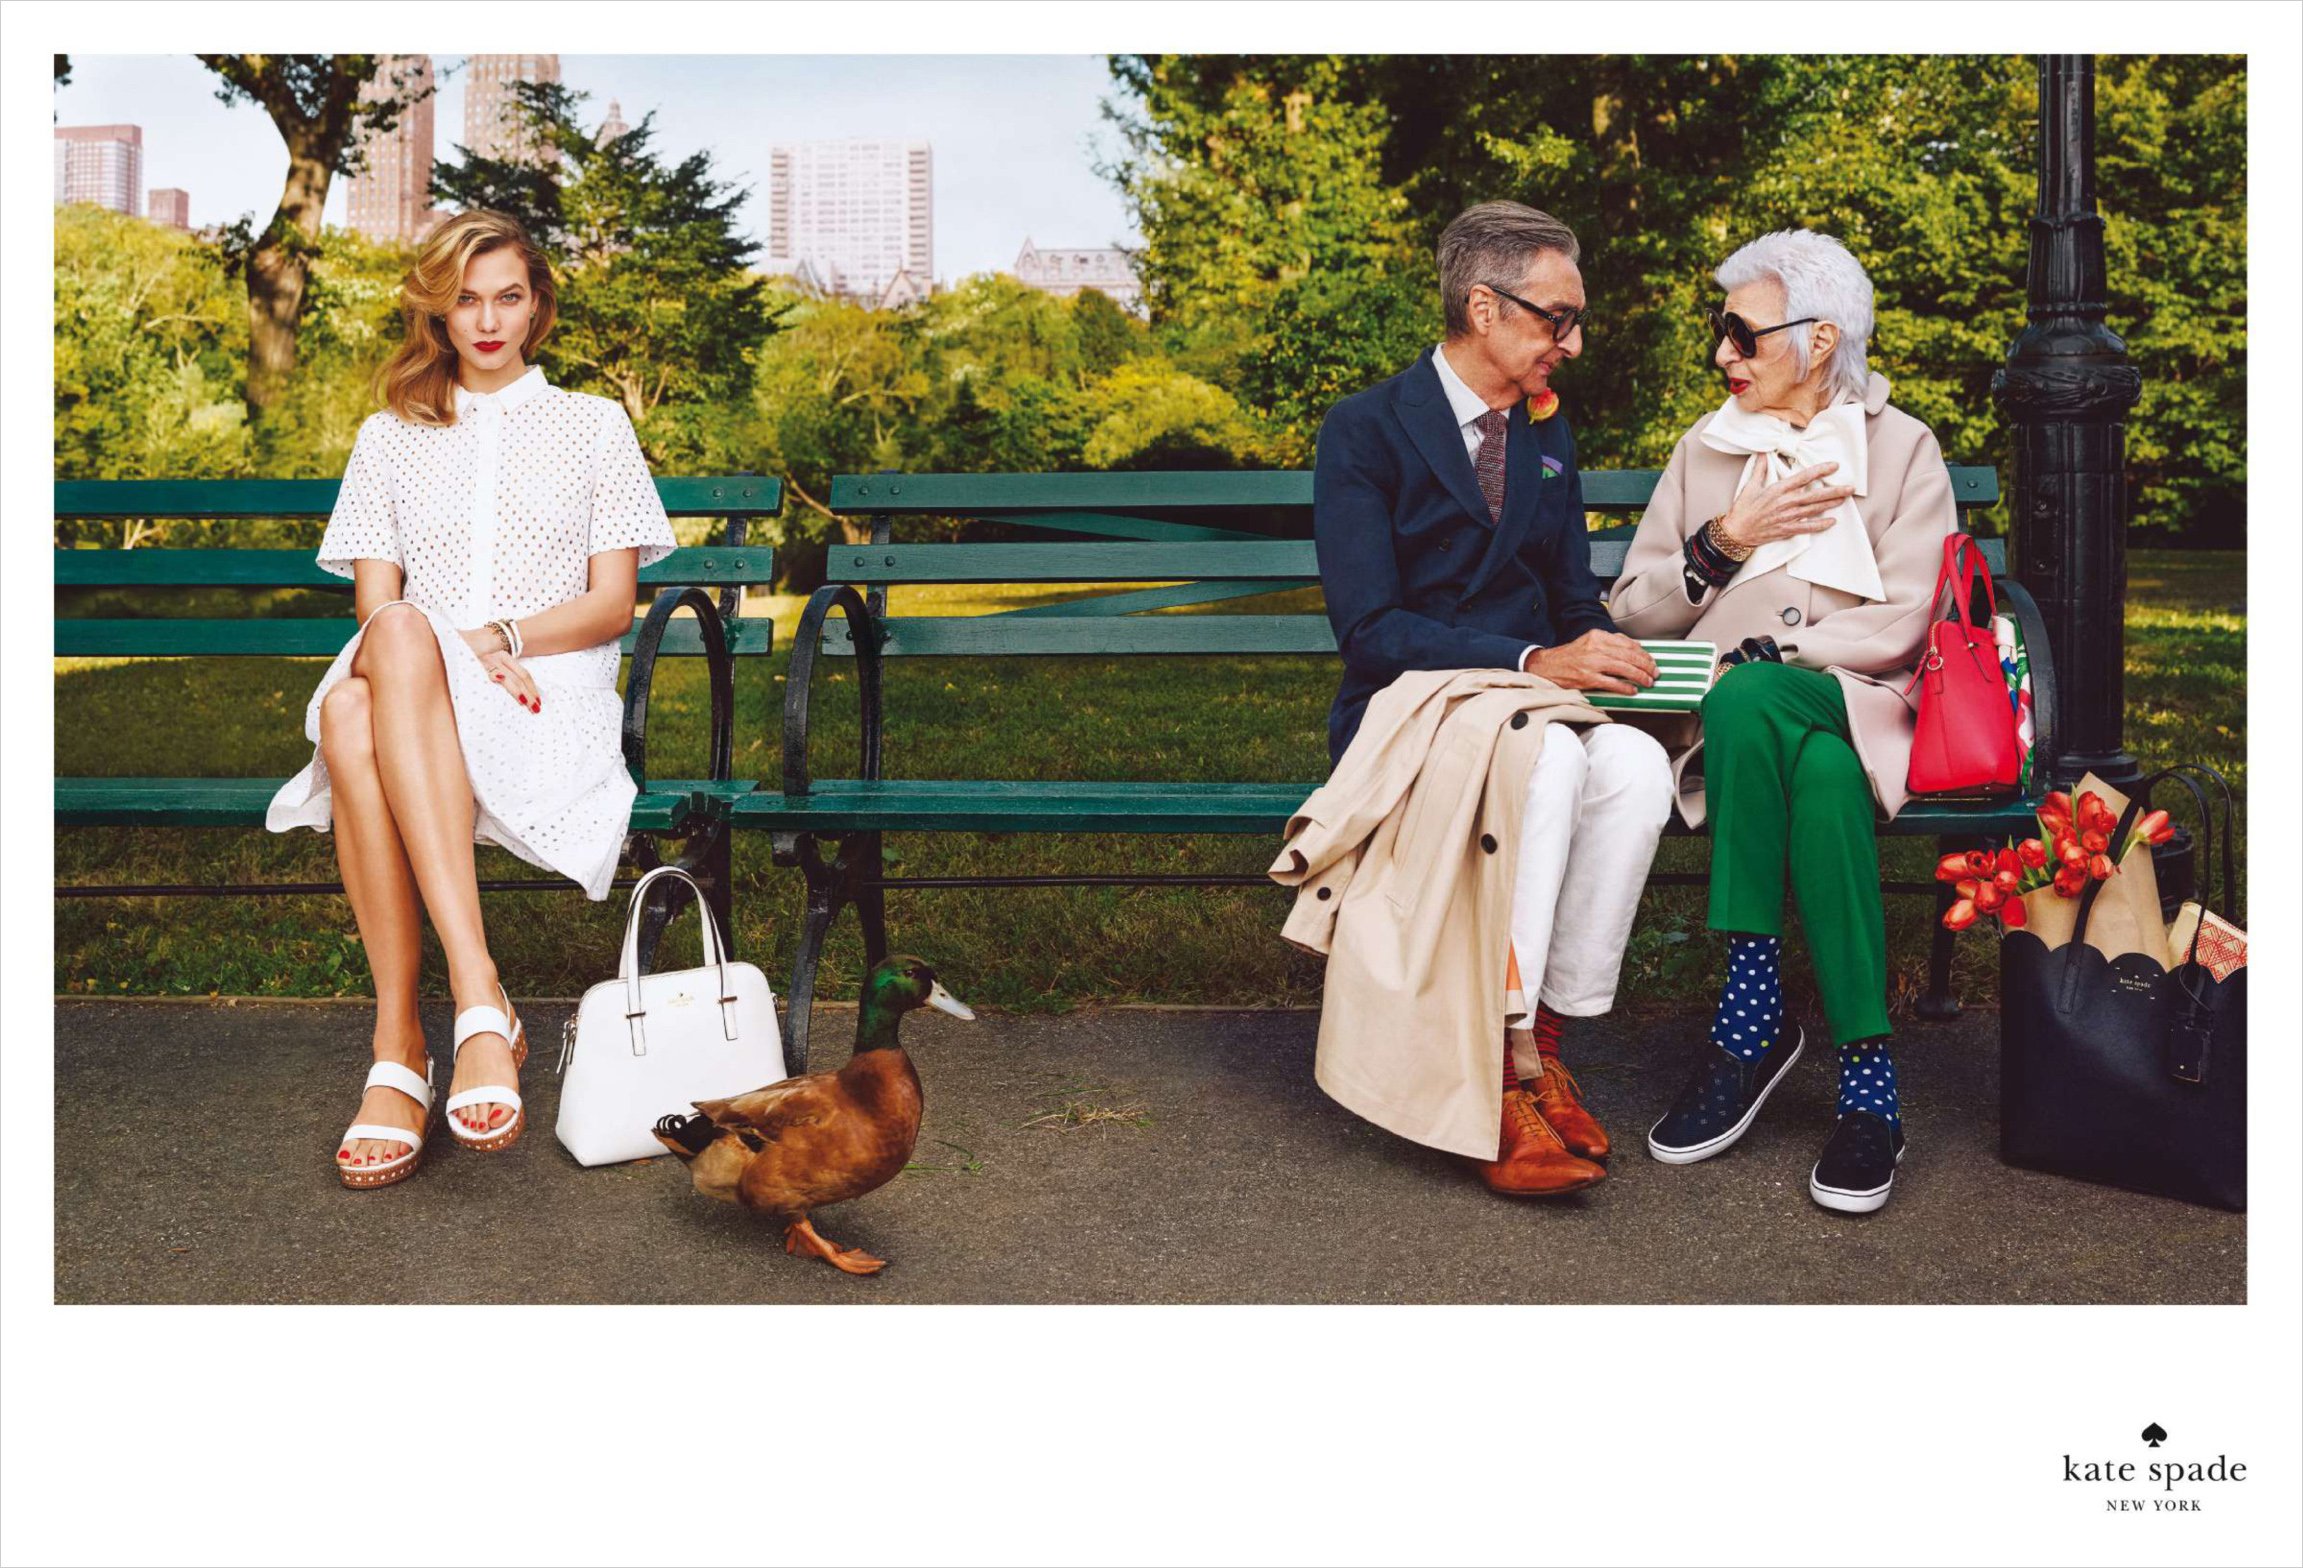 kate-spade-spring-ad-campaign-2015-the-impression-021